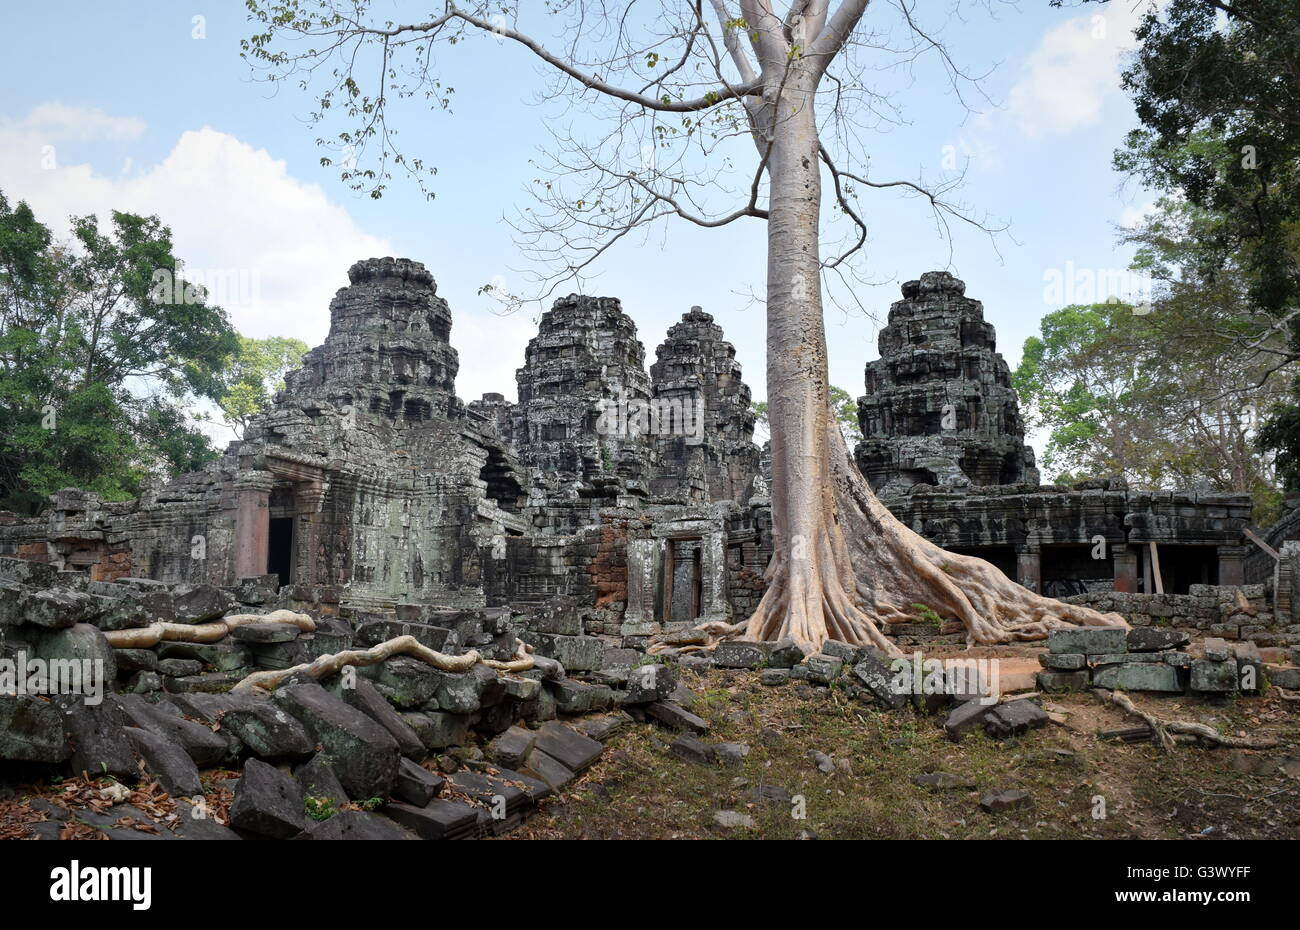 Banteay Kdei antiques ruines temple bouddhiste, Angkor, Cambodge Banque D'Images